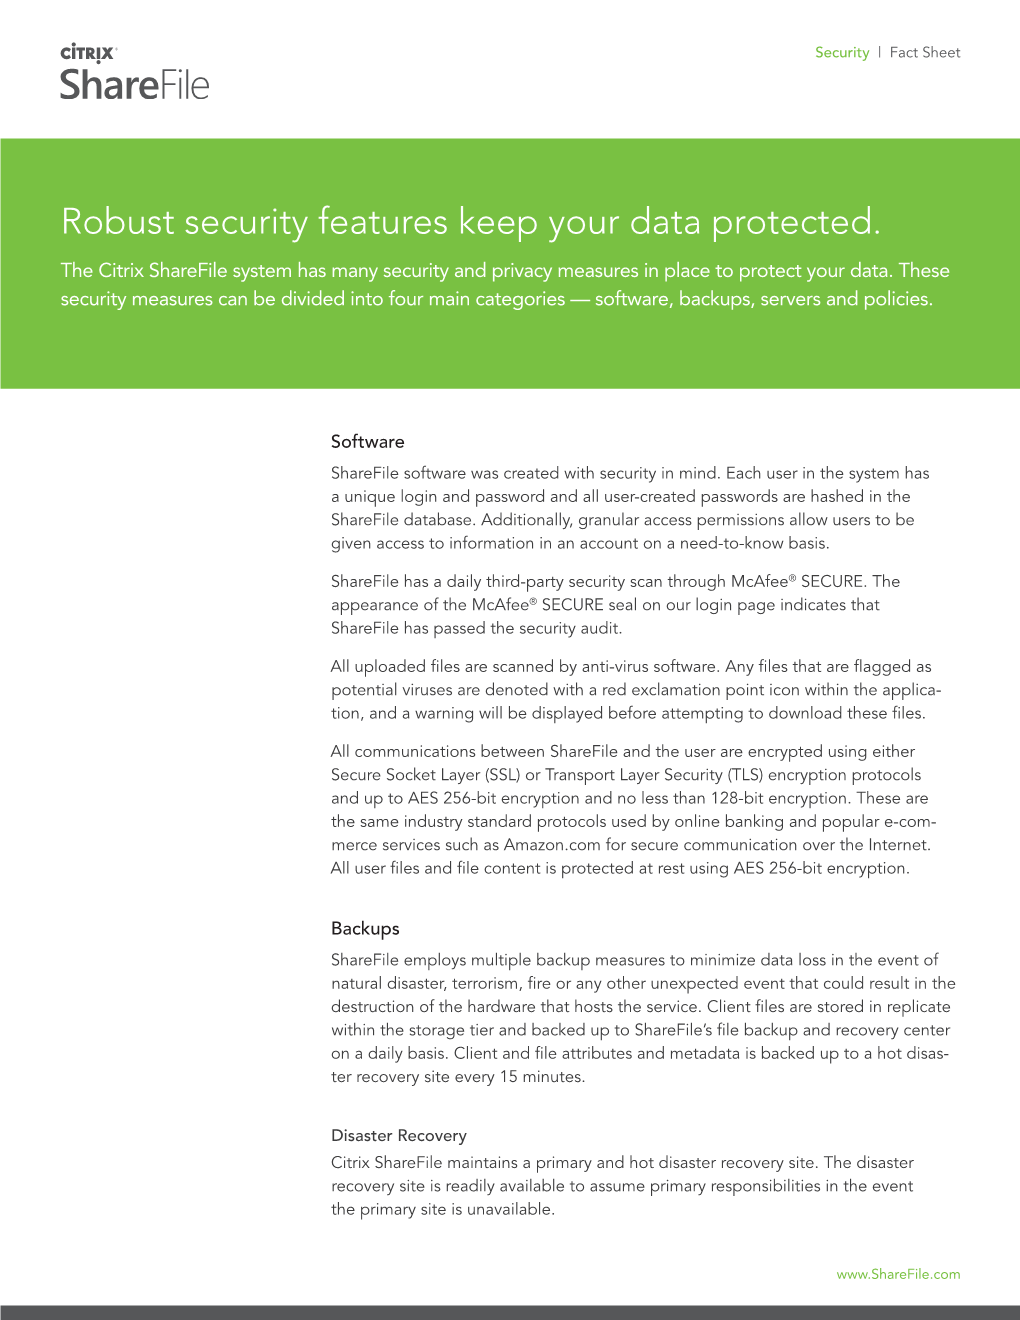 Robust Security Features Keep Your Data Protected